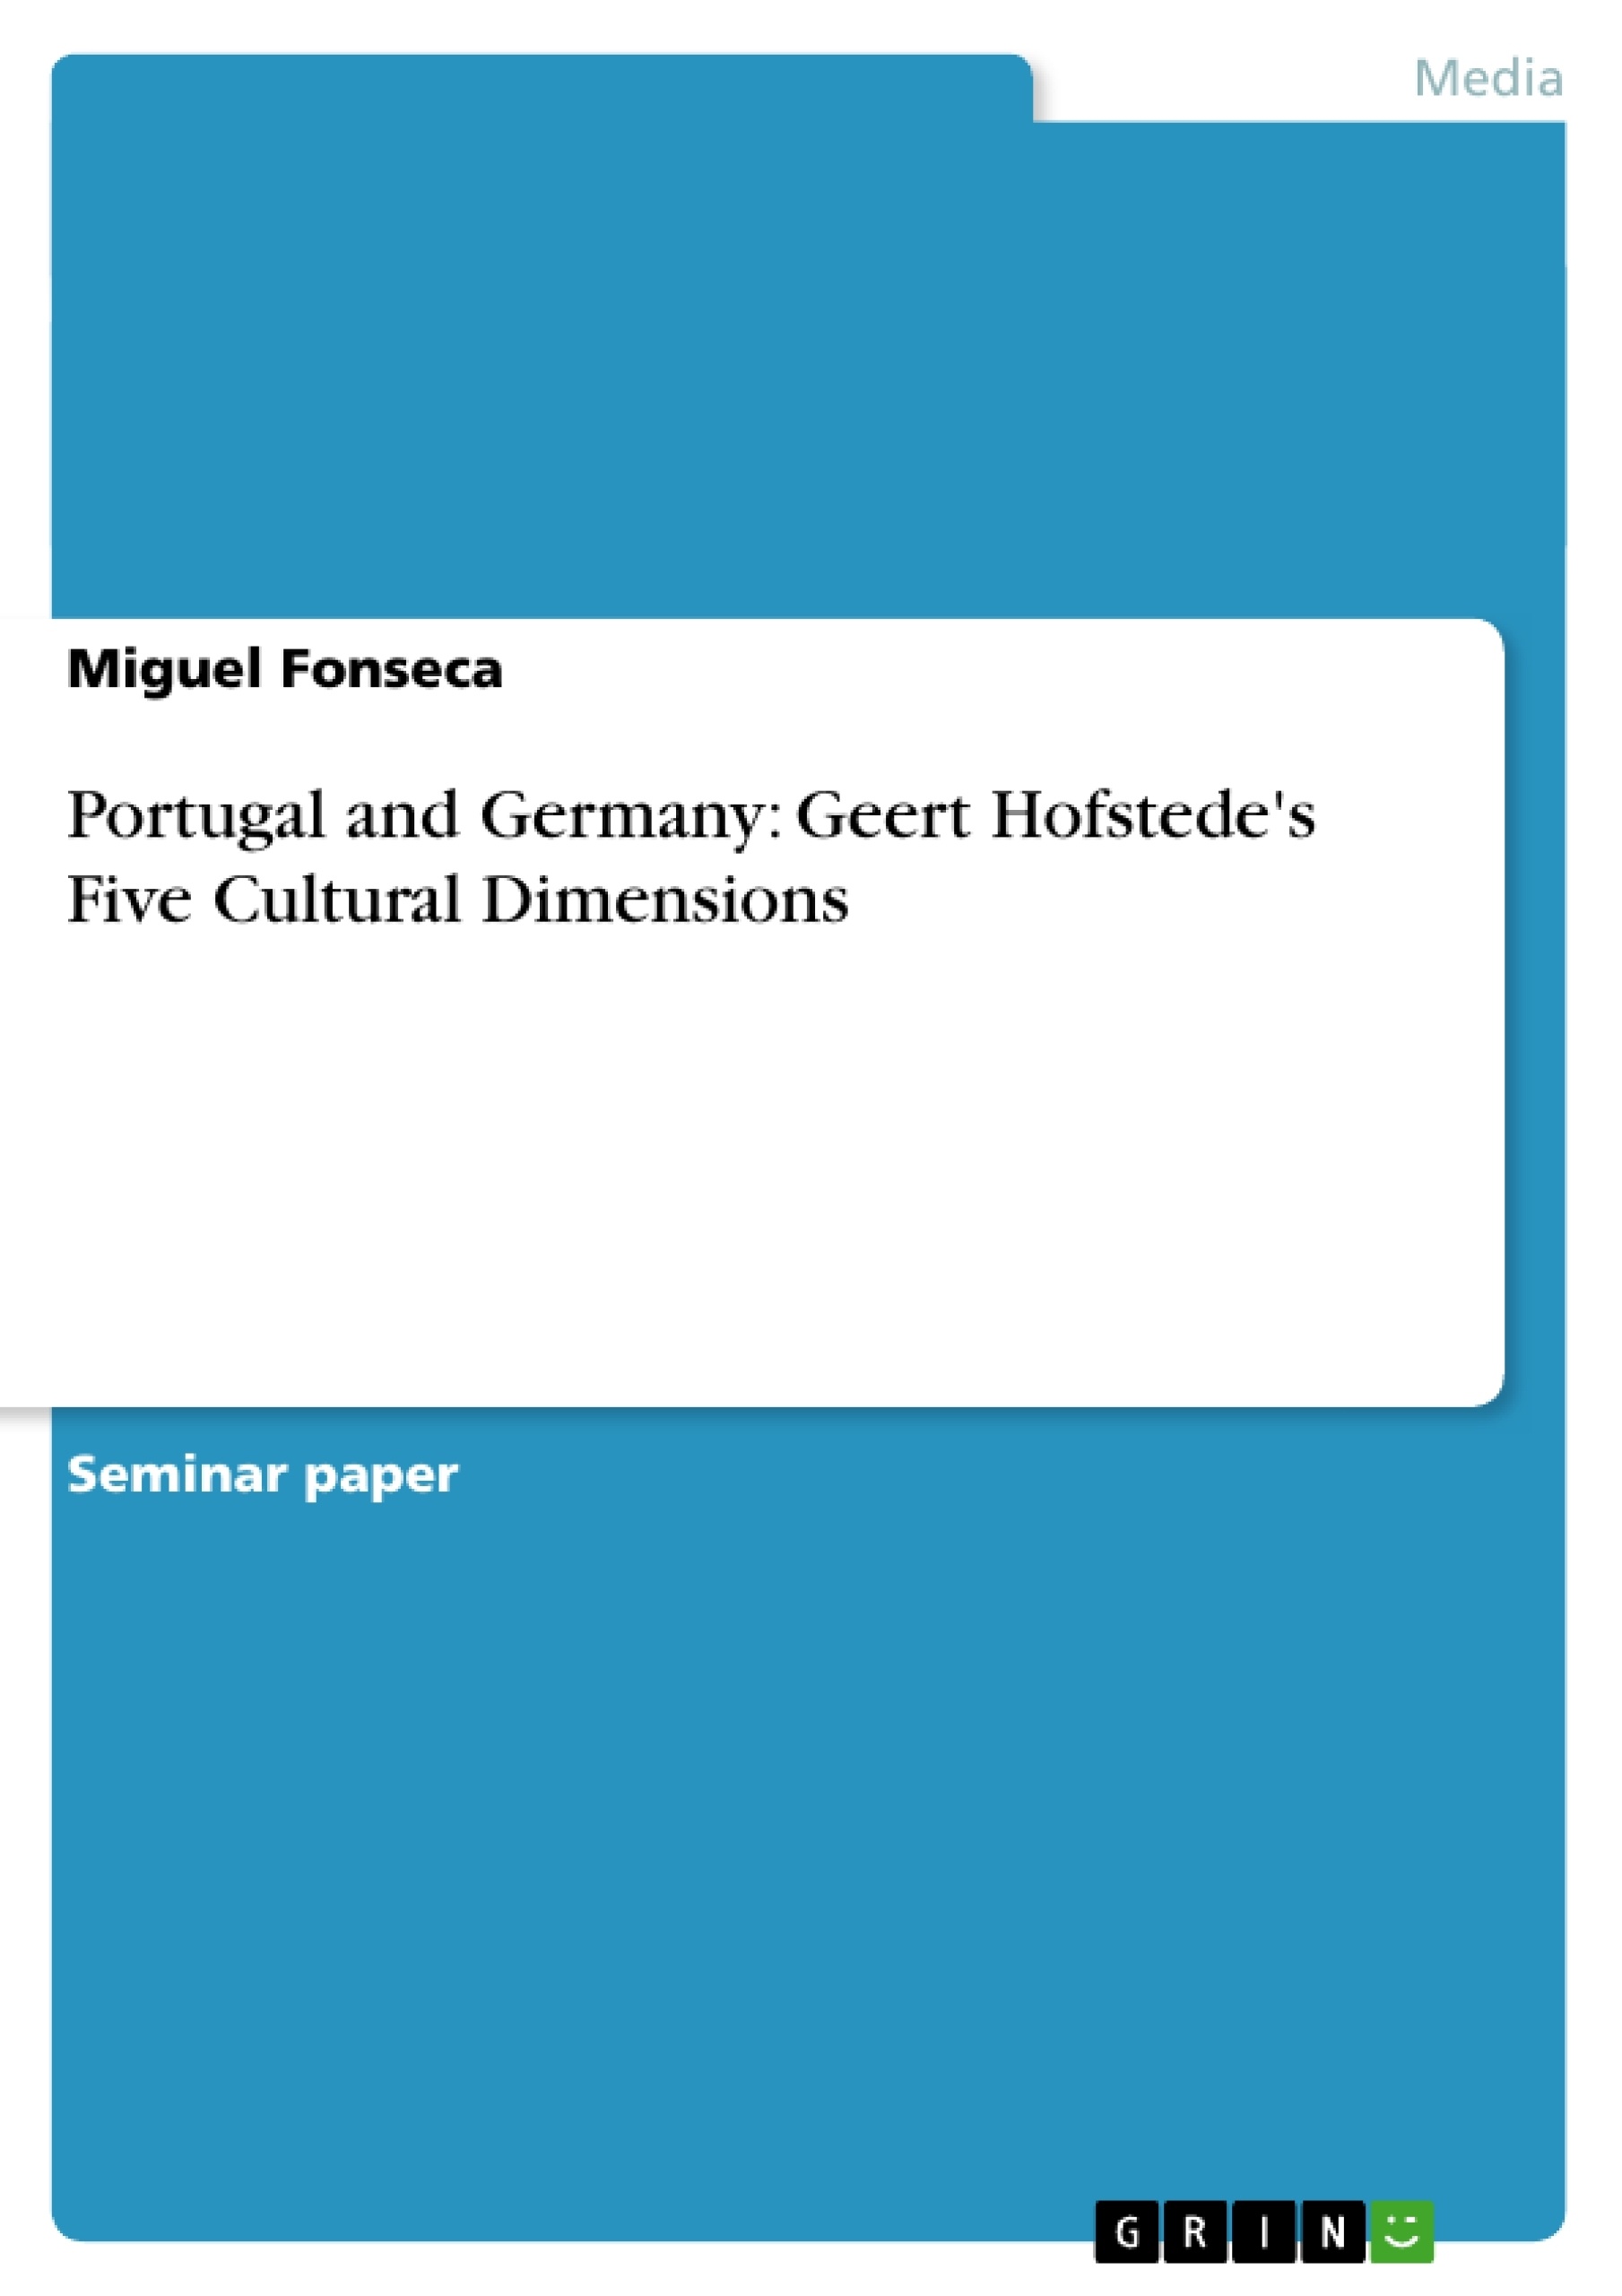 Title: Portugal and Germany: Geert Hofstede's Five Cultural Dimensions